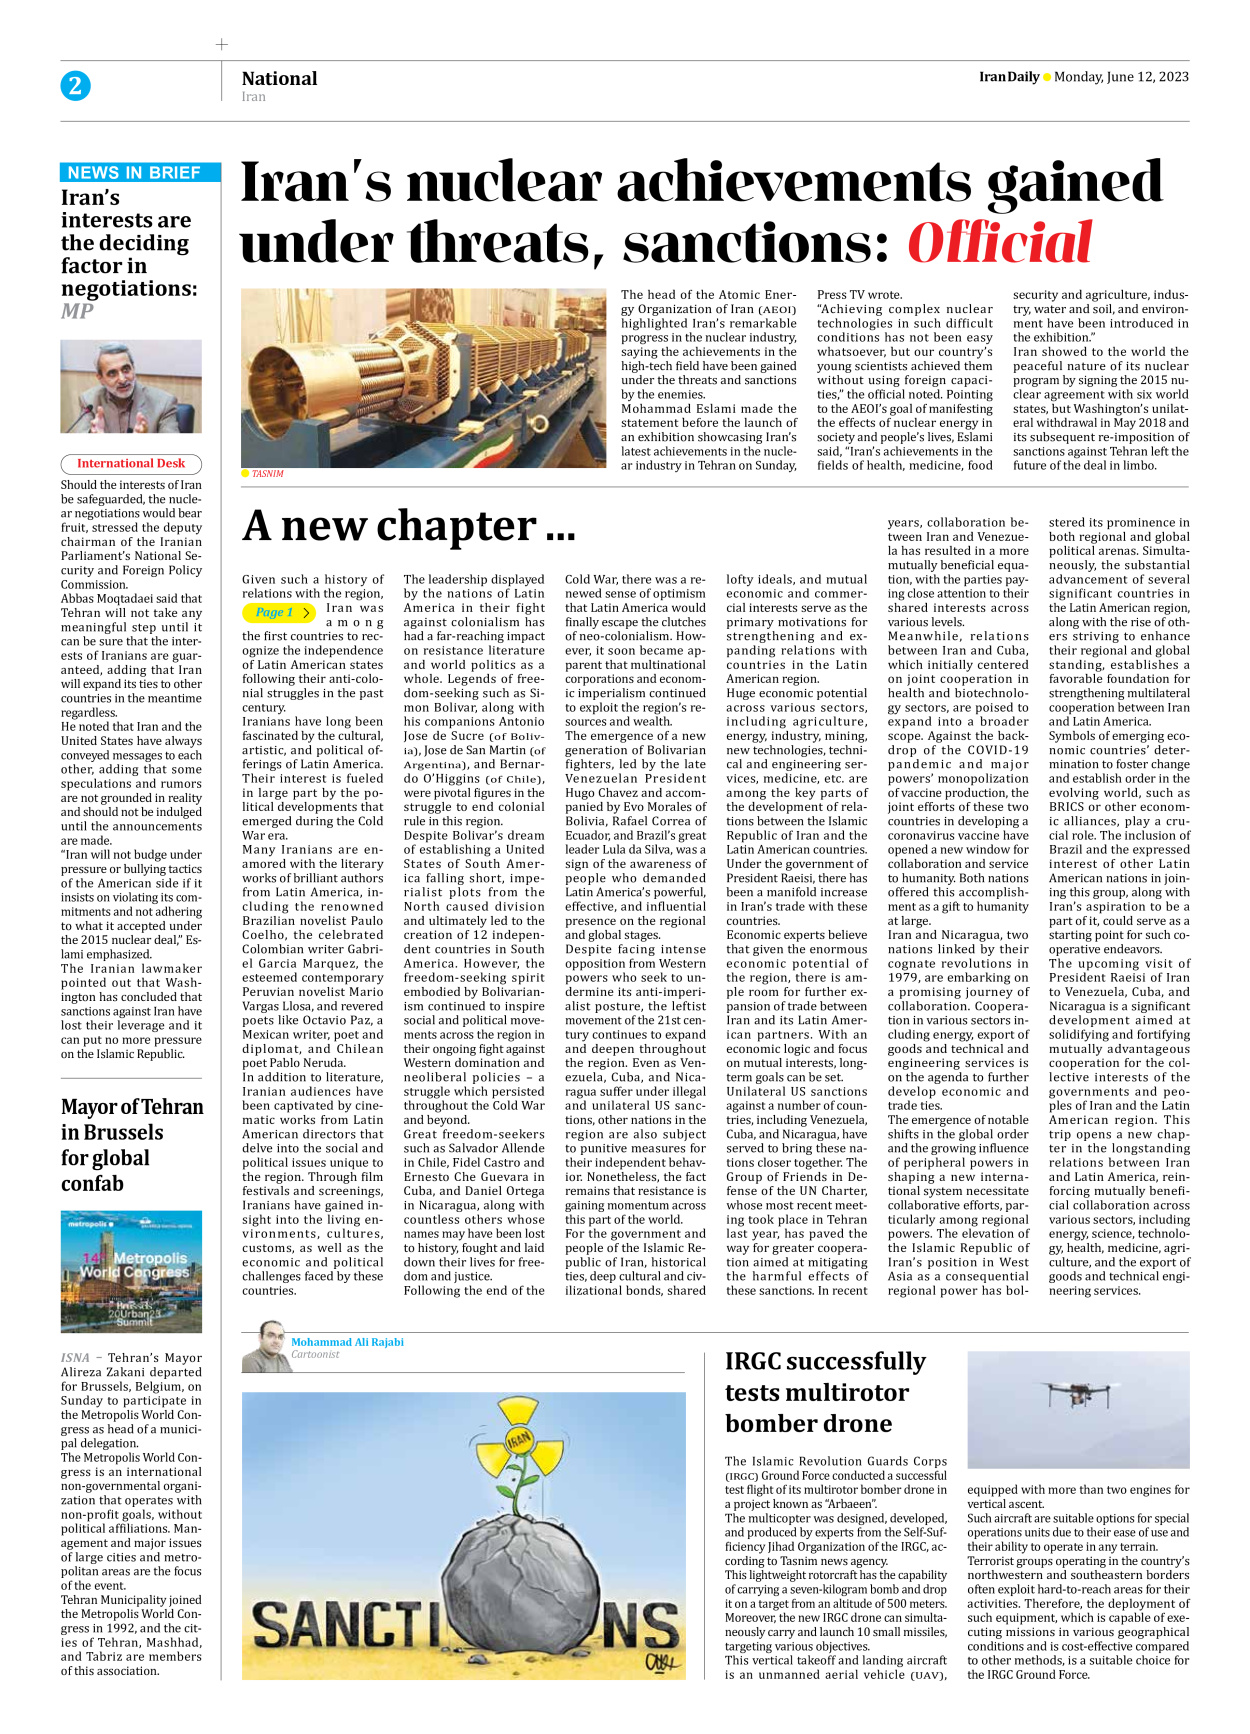 Iran Daily - Number Seven Thousand Three Hundred and Twelve - 12 June 2023 - Page 2